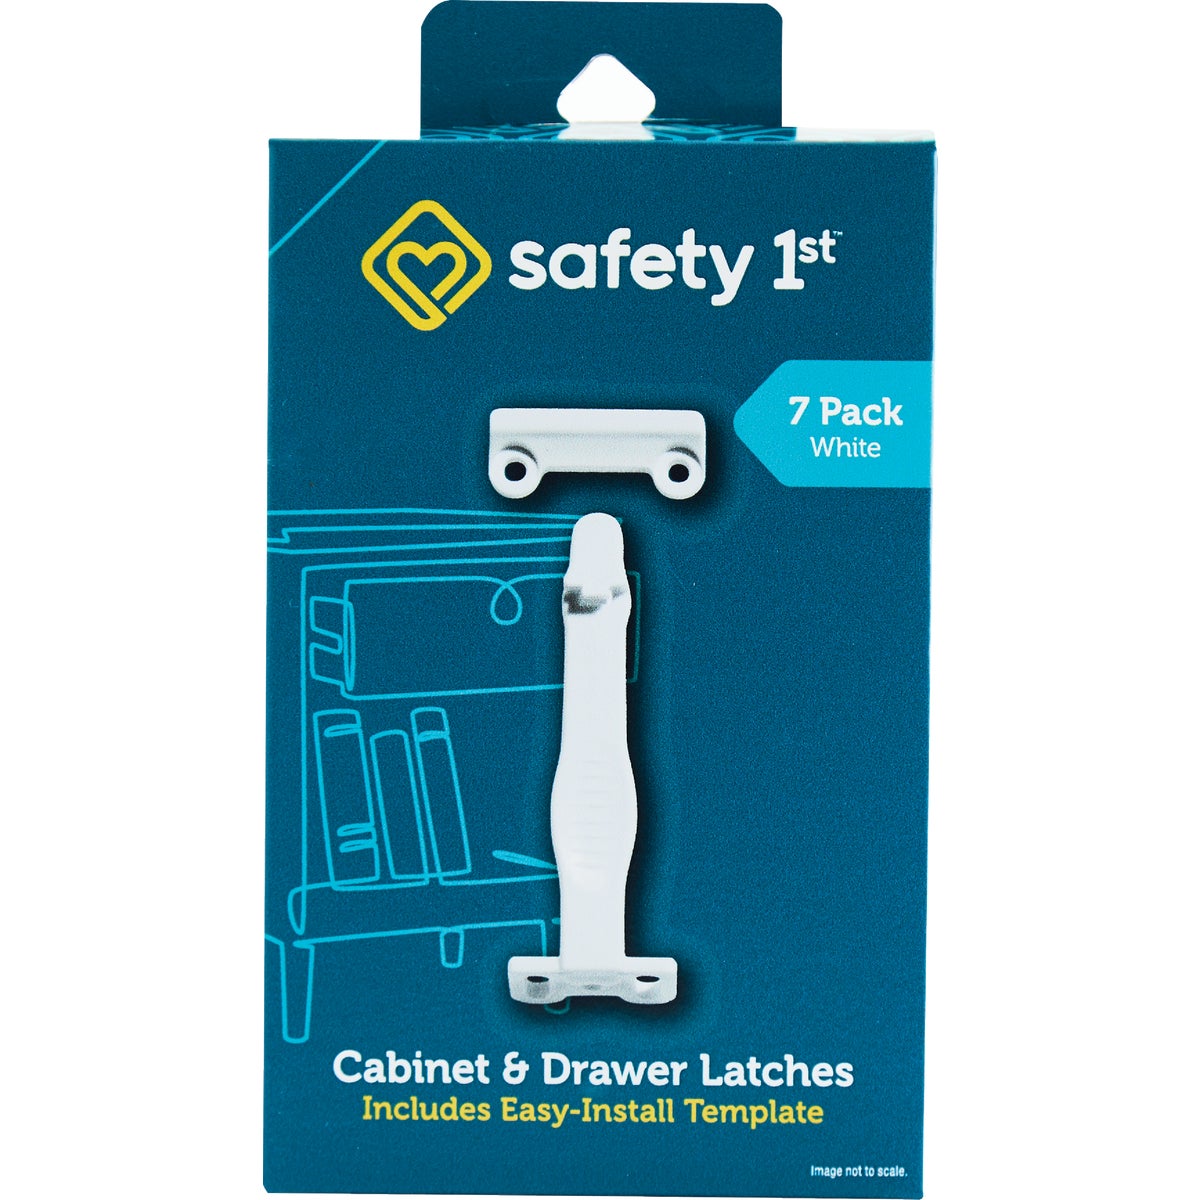 Safety 1st White Plastic Cabinet & Drawer Latches (7-Count)